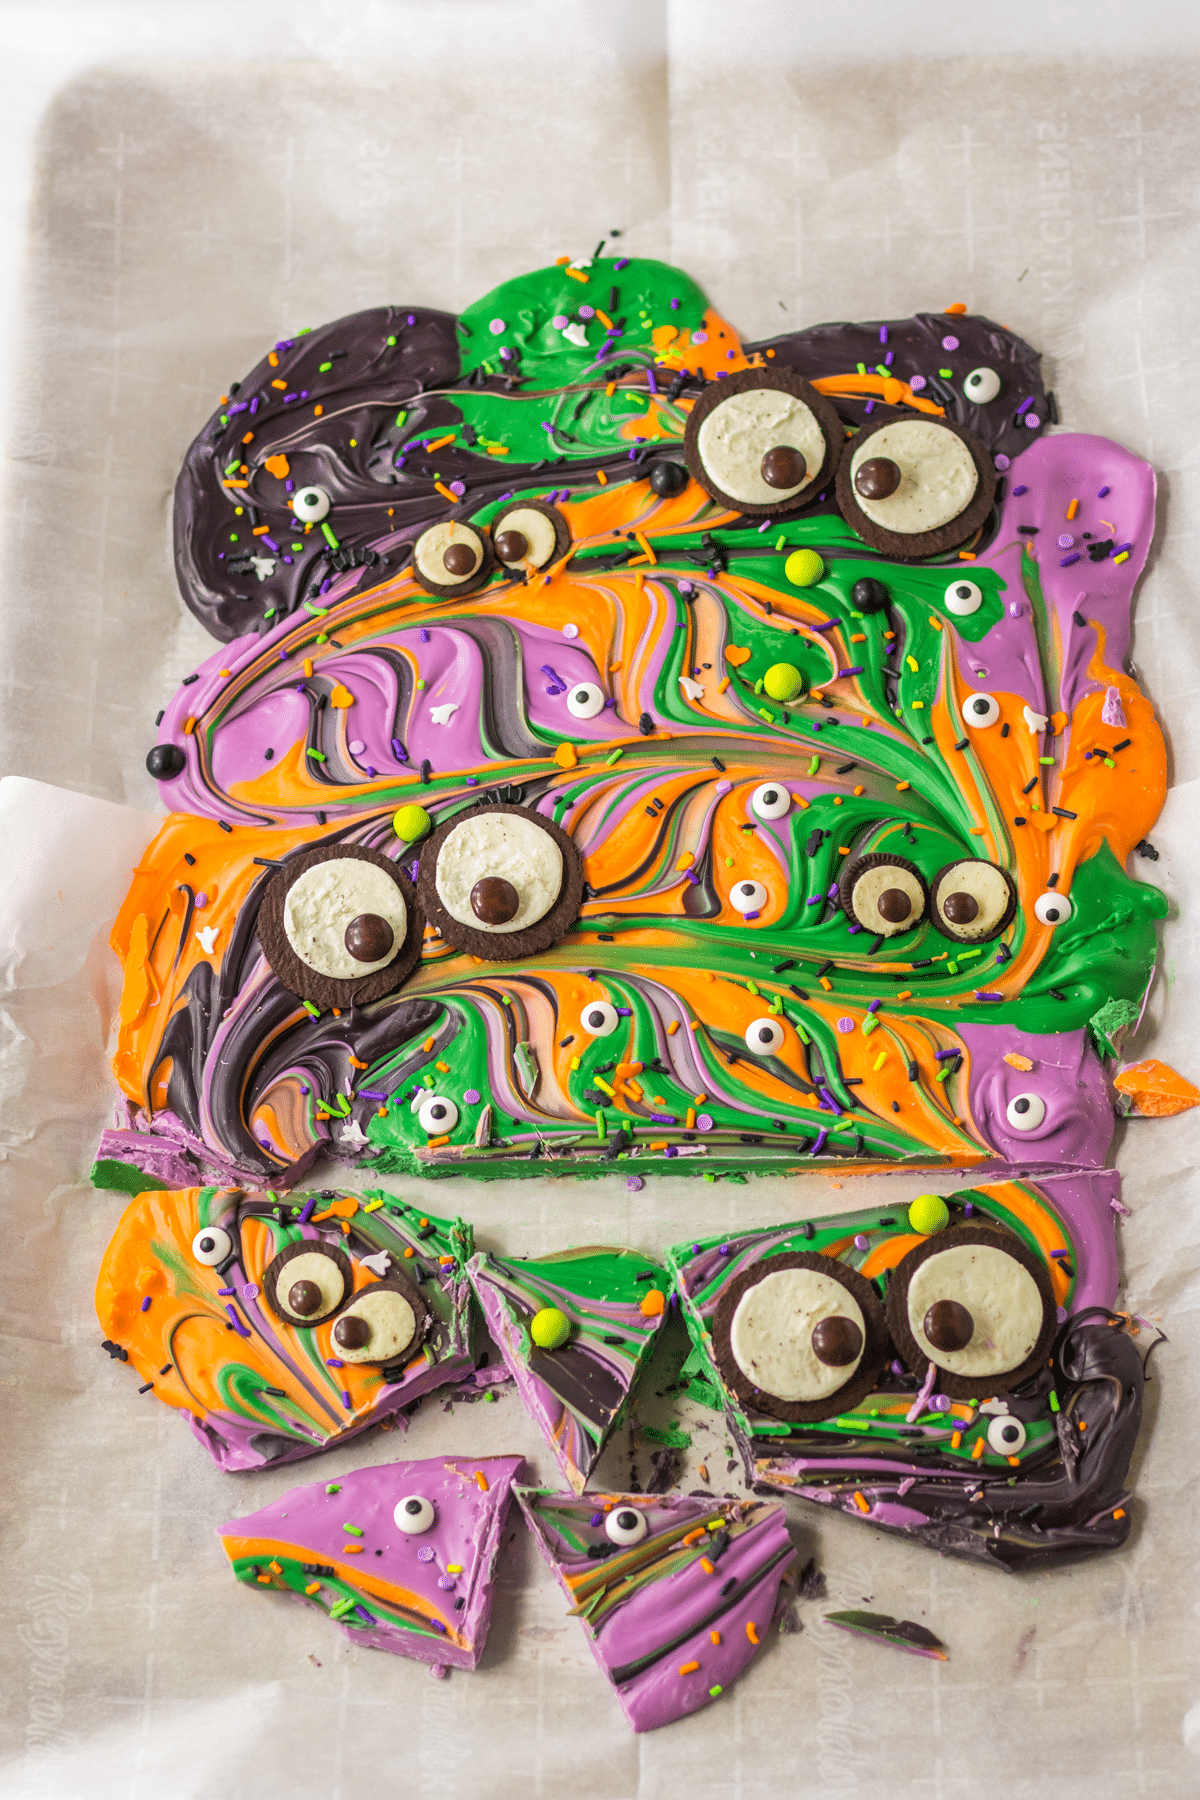 Another process in preparing Halloween Cookie Bark is to freeze the mixture